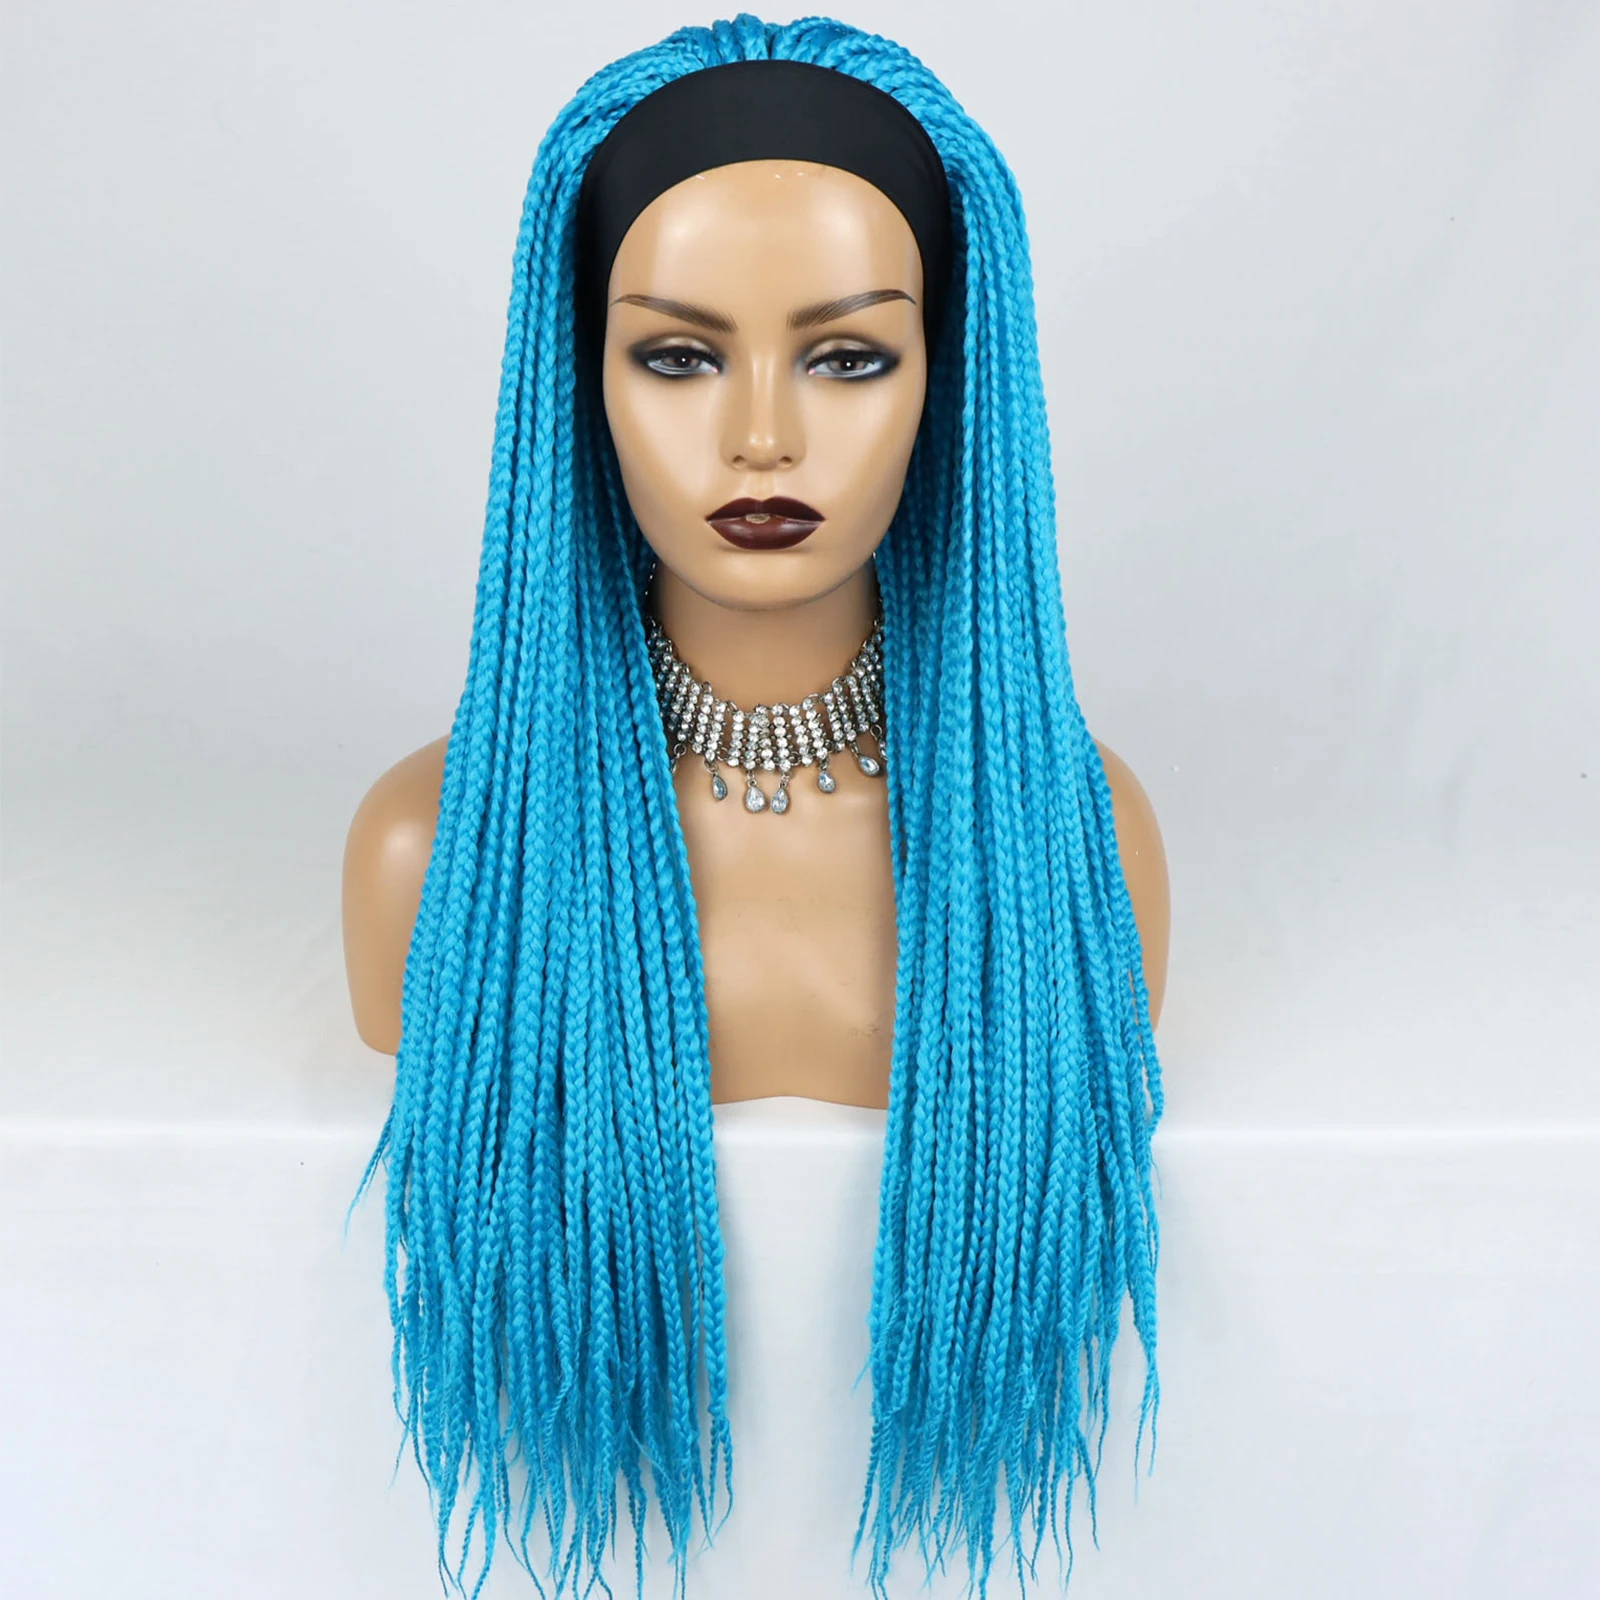 Blue Color Headband Synthetic Wigs for Black Women 26Inch Long Hair French Box Braid Wig Crochet Hair Braided Wigs Hair Band Wig